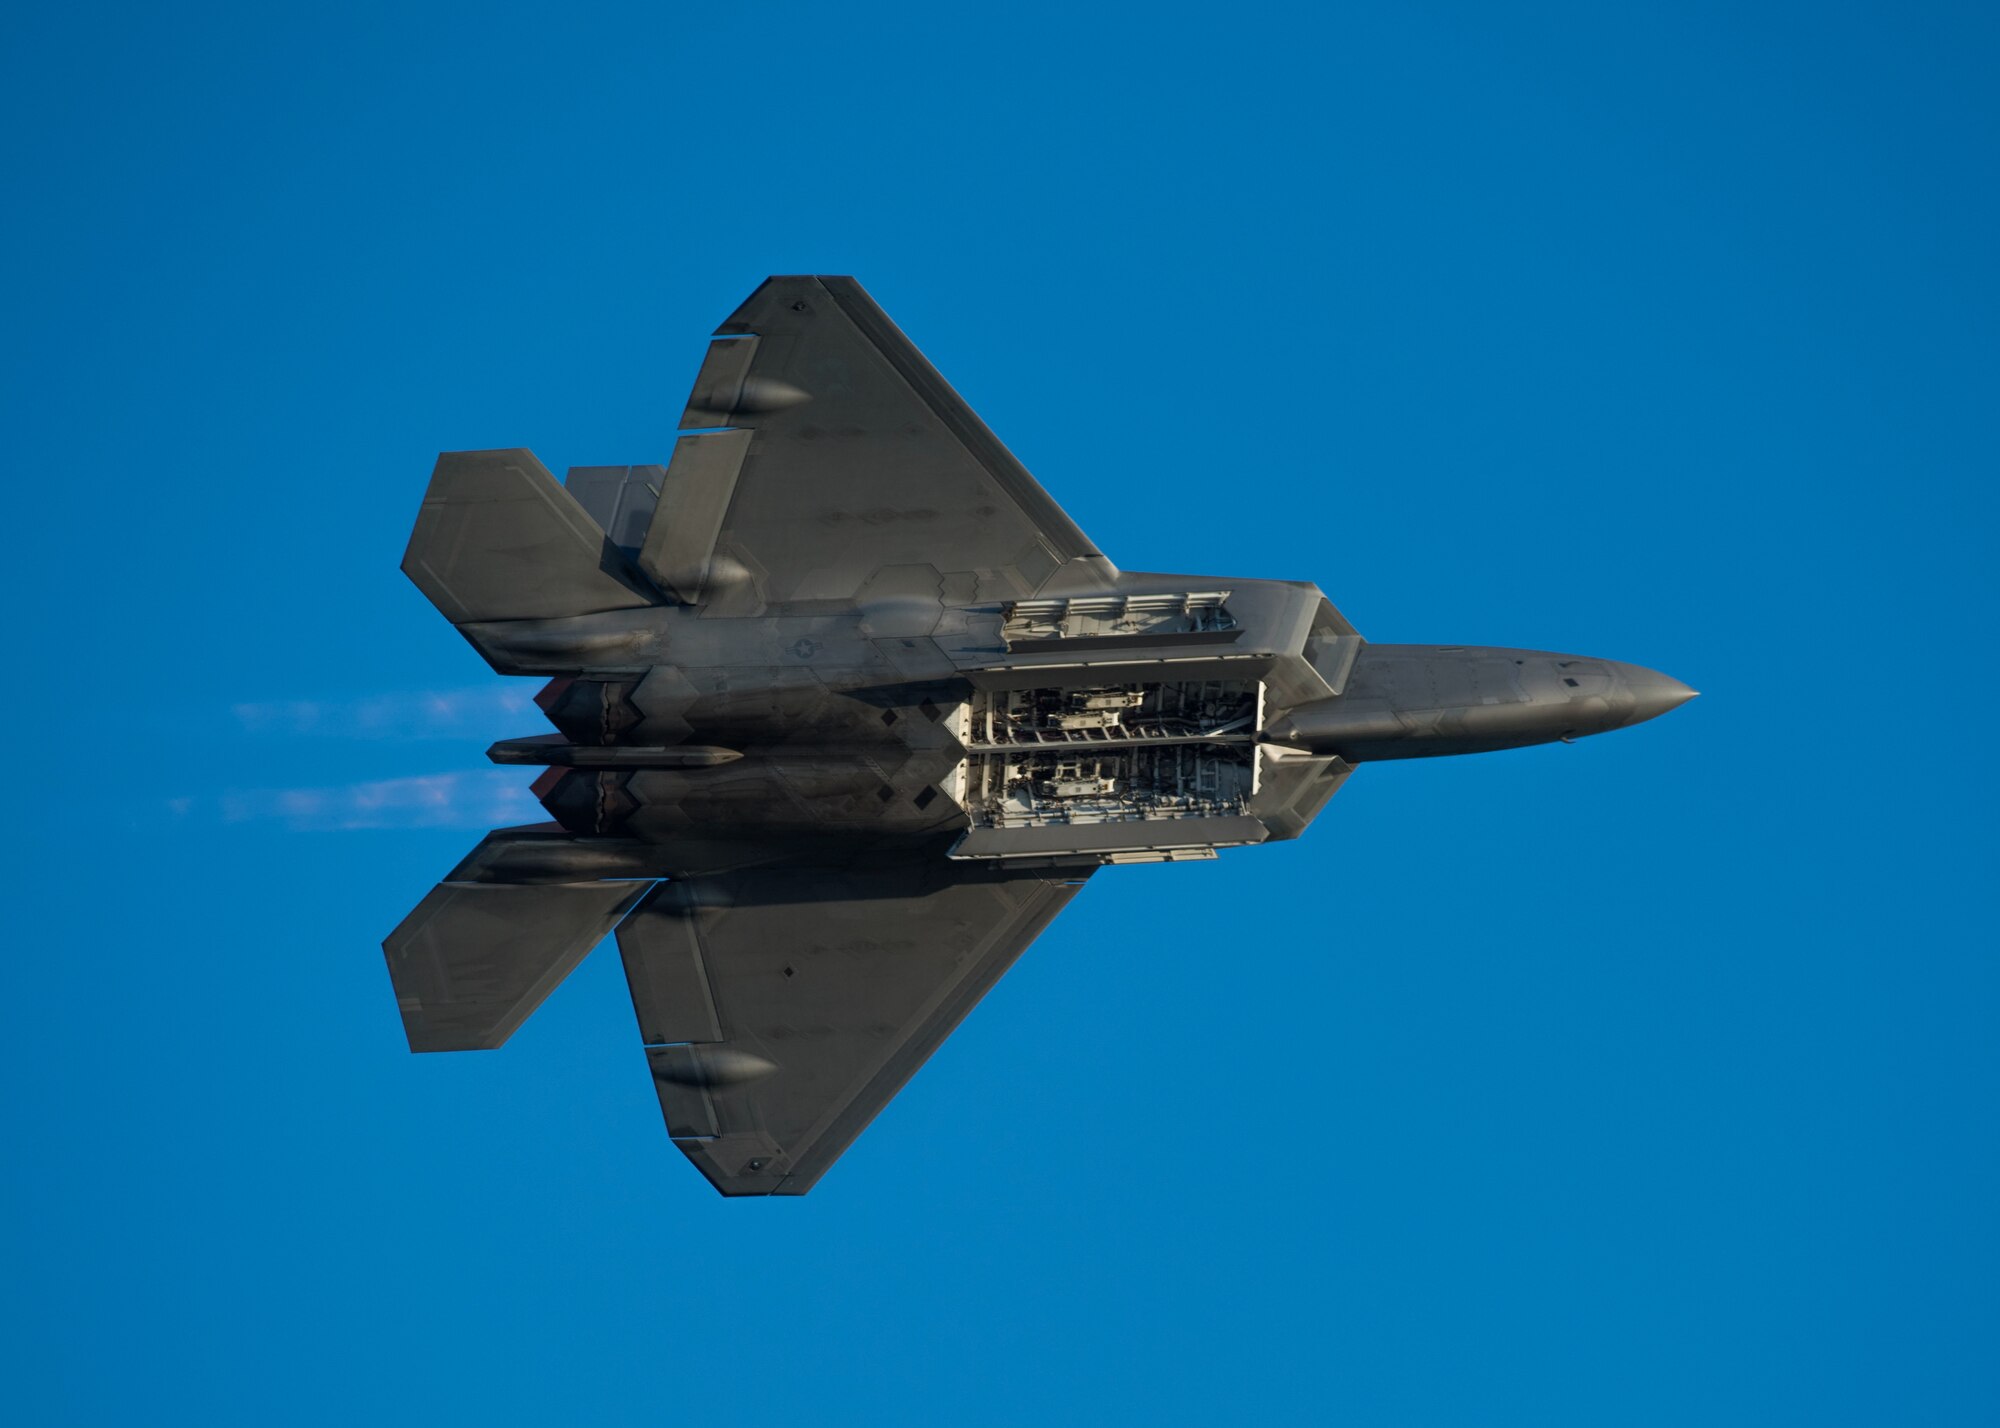 Maj. Paul "Loco" Lopez, F-22 Raptor Demonstration Team pilot, highlights the jet's capabilities at Joint Base Langley-Eustis, Va., Aug. 24, 2018. The Raptor performs a wide range of aerial maneuvers making it the U.S. Air Force's leading fighter aircraft. (U.S. Air Force courtesy photo)